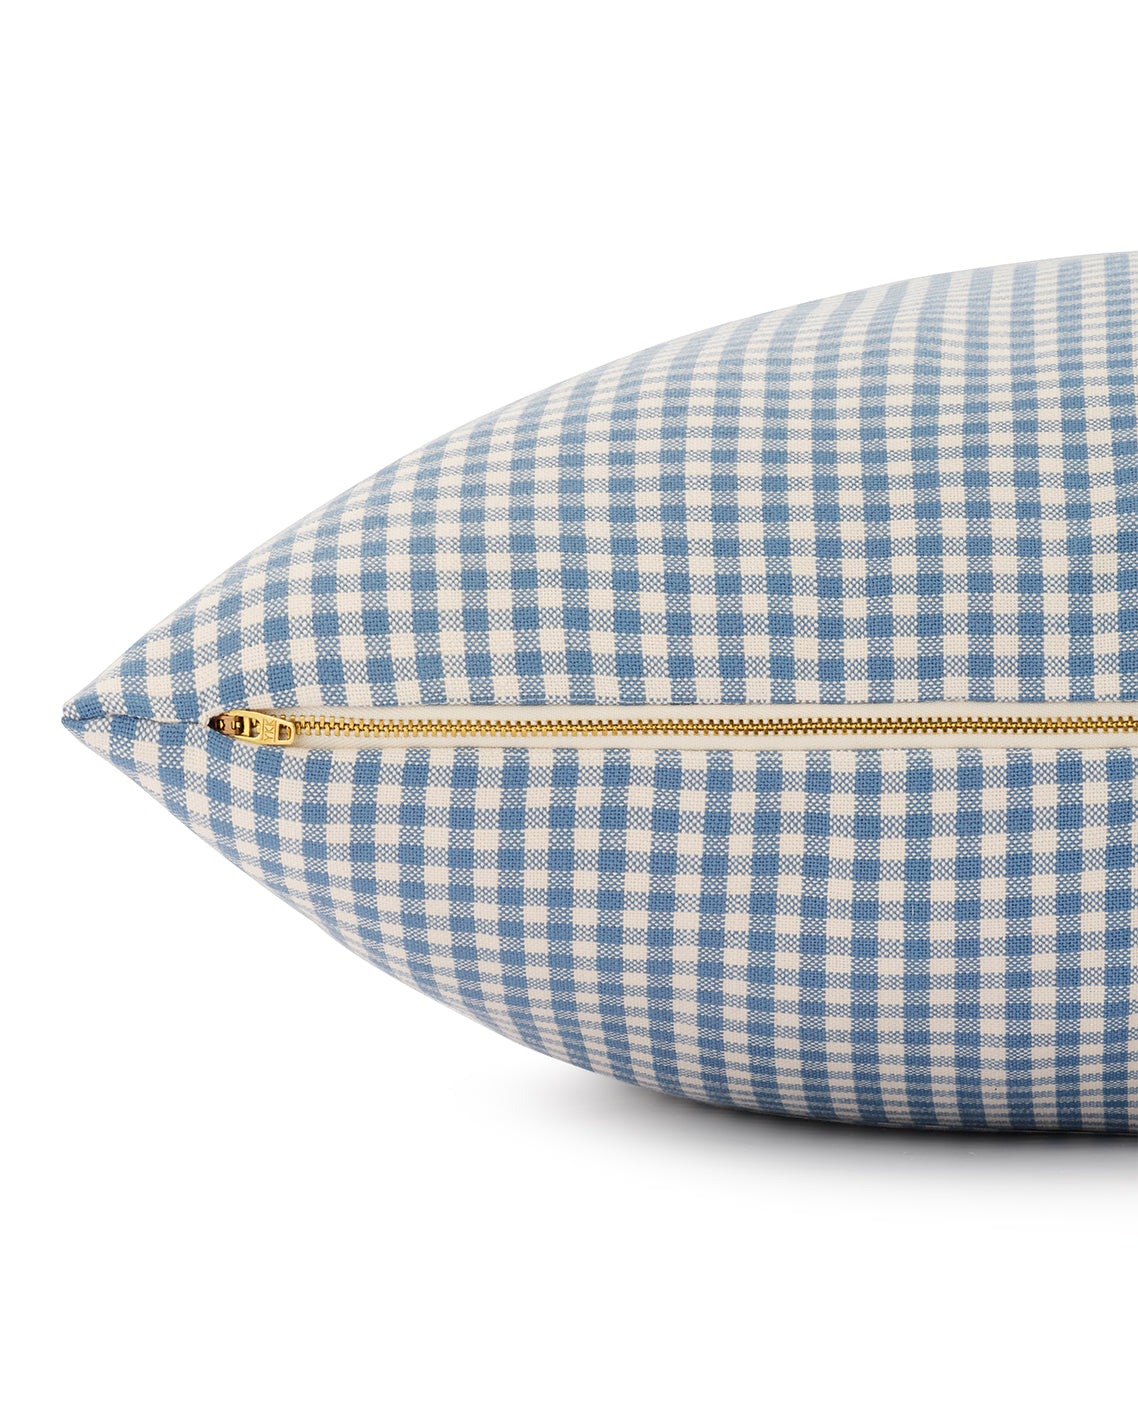 DJ X TFD Dog Bed in Blue Gingham